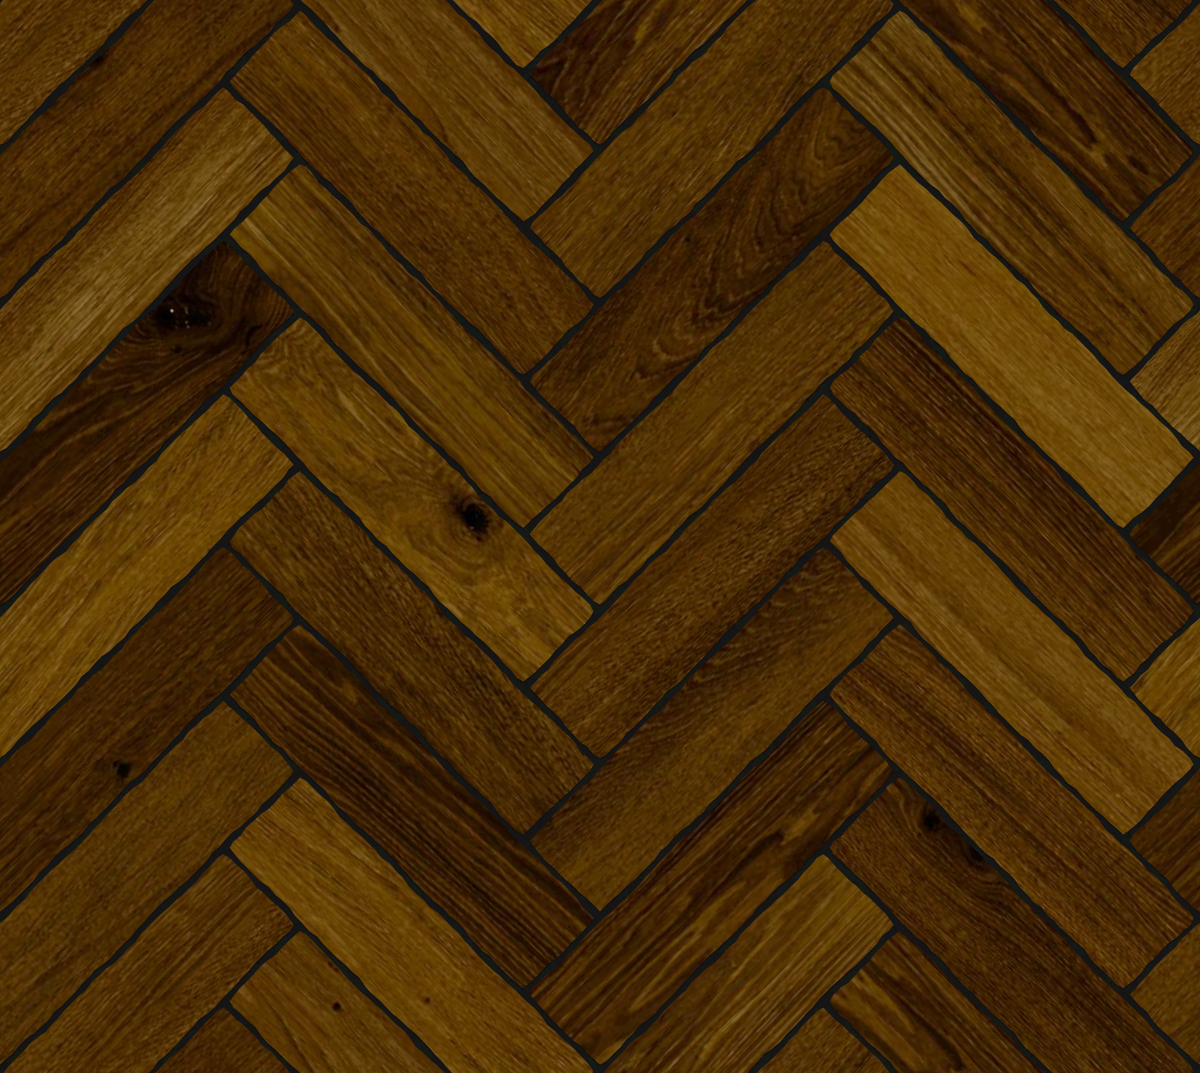 A seamless wood texture with dark stained timber boards arranged in a Herringbone pattern